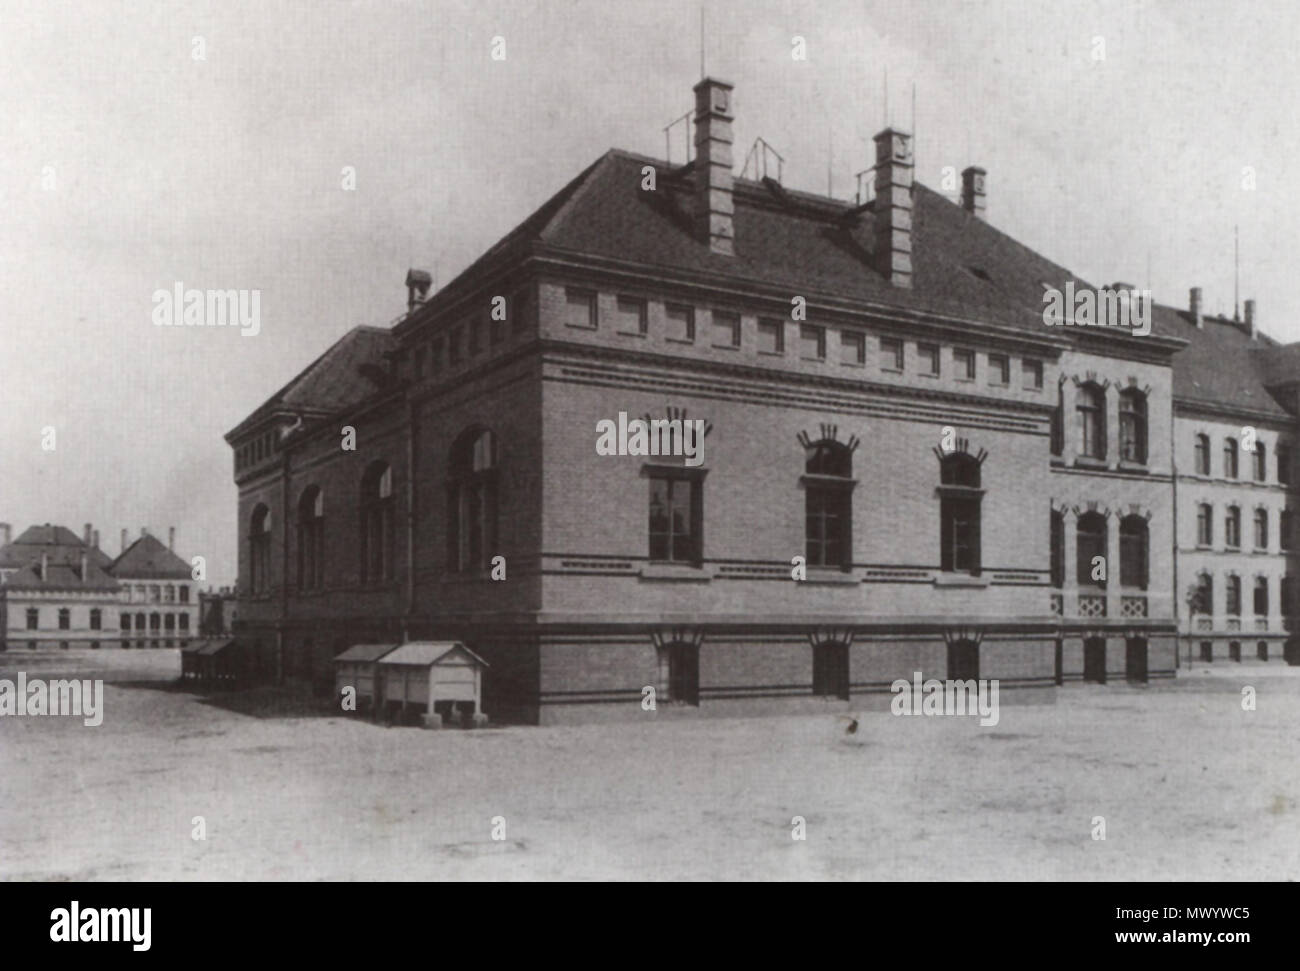 Prinz Bernhard High Resolution Stock Photography and Images - Alamy